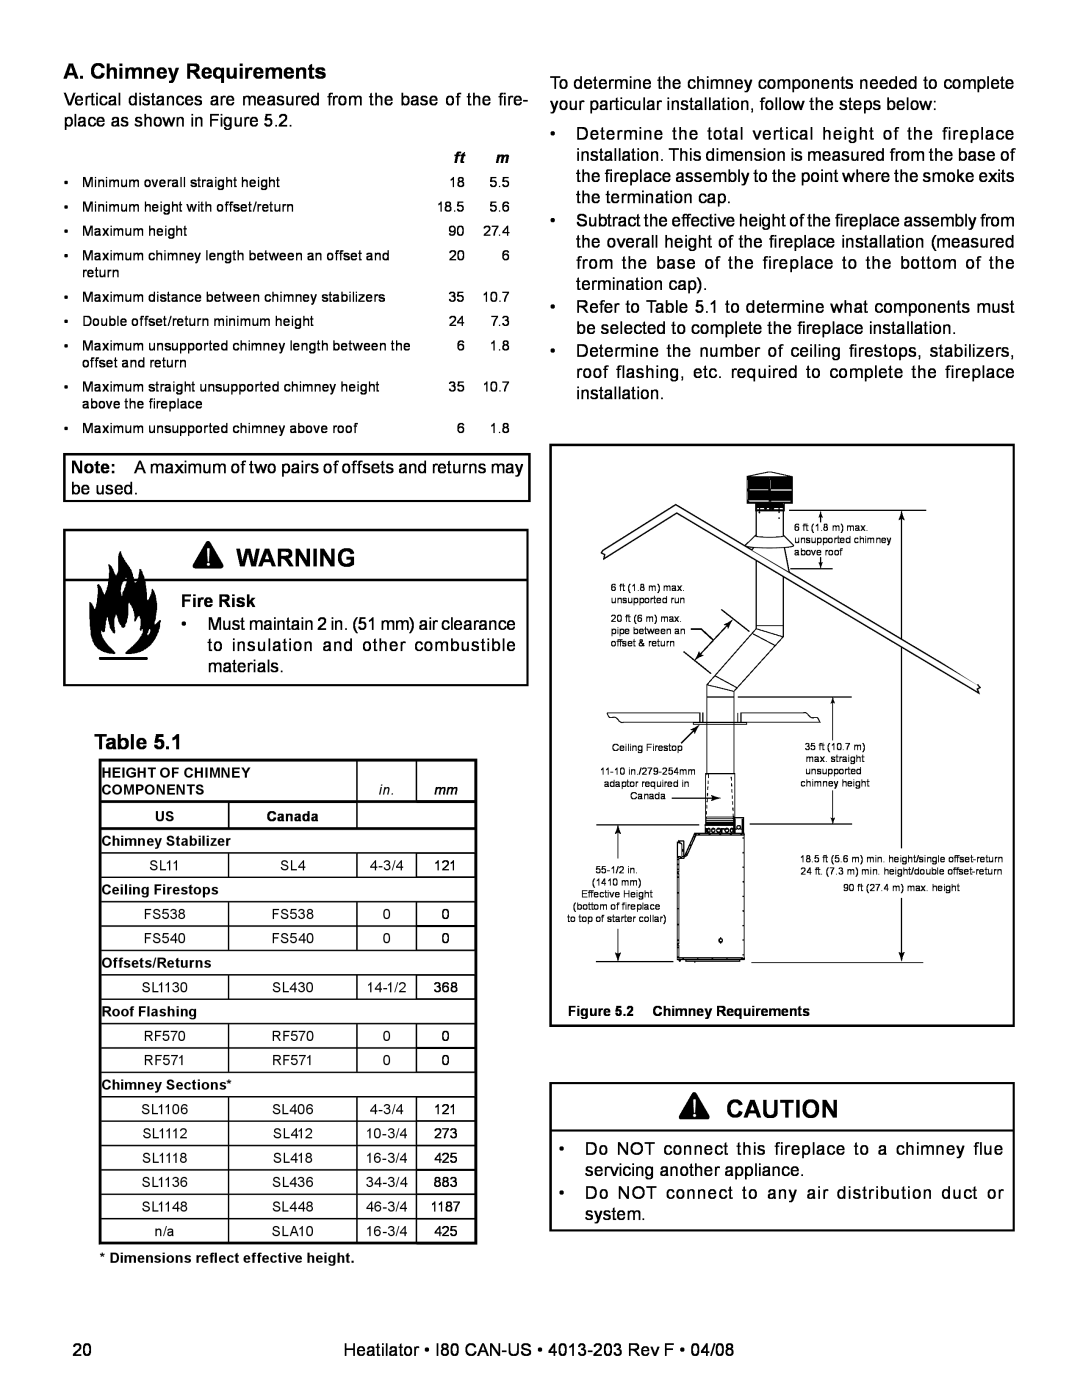 Heatiator I80 owner manual A. Chimney Requirements, Fire Risk 